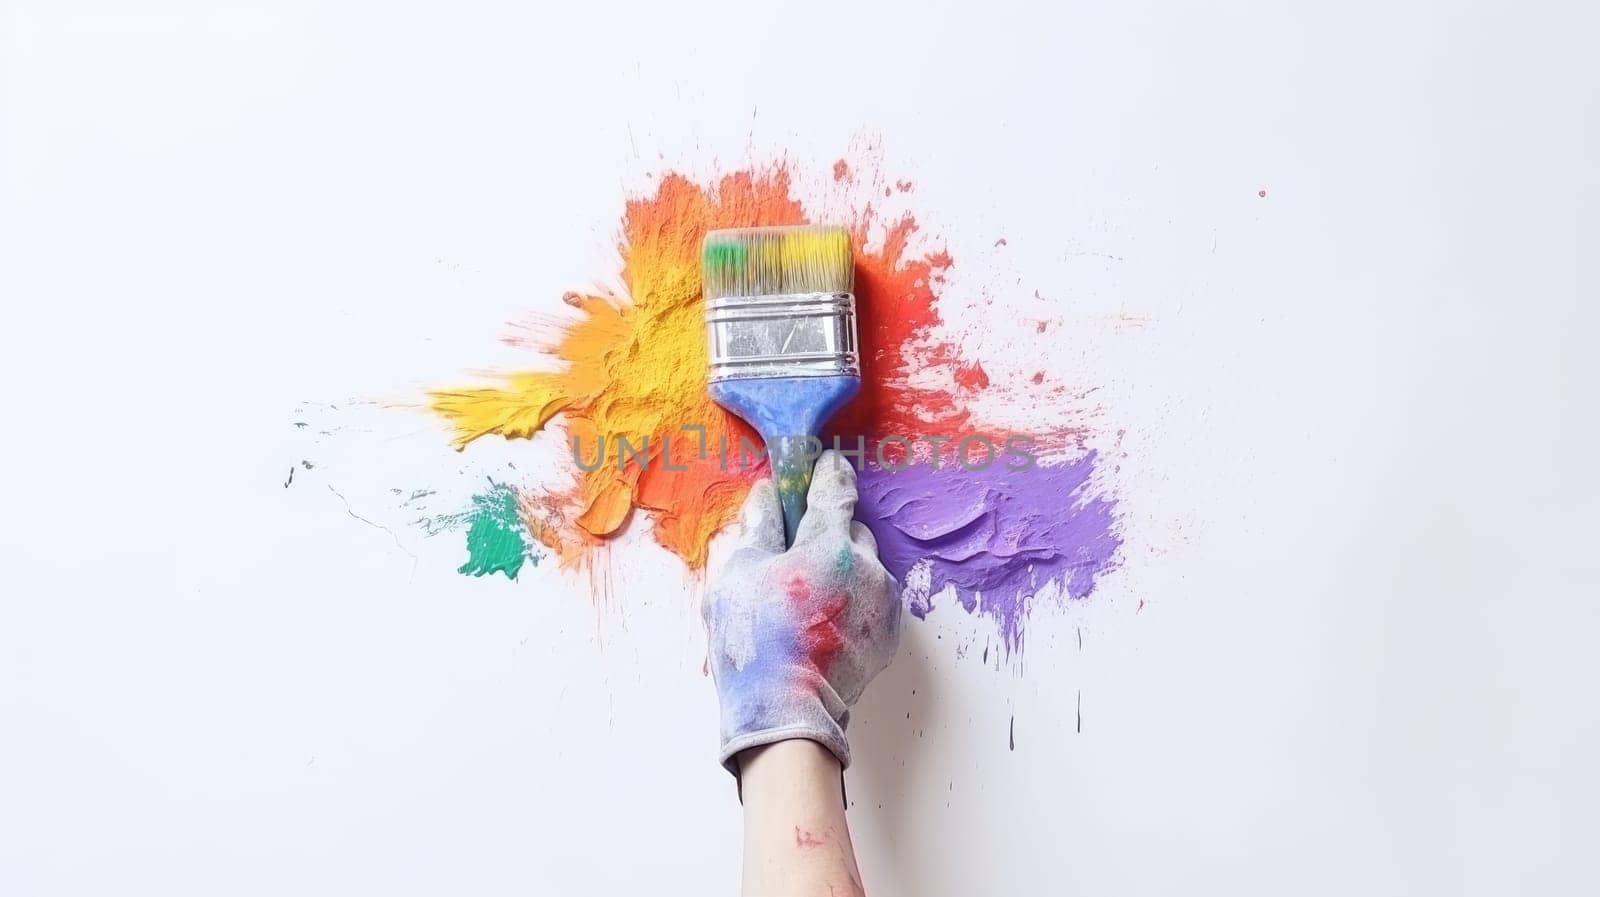 Colorful DIY Renovation. Hand with Glove Holding Paint Brush - Rainbow Splash on White Wall - Home Improvement Concept. by ViShark